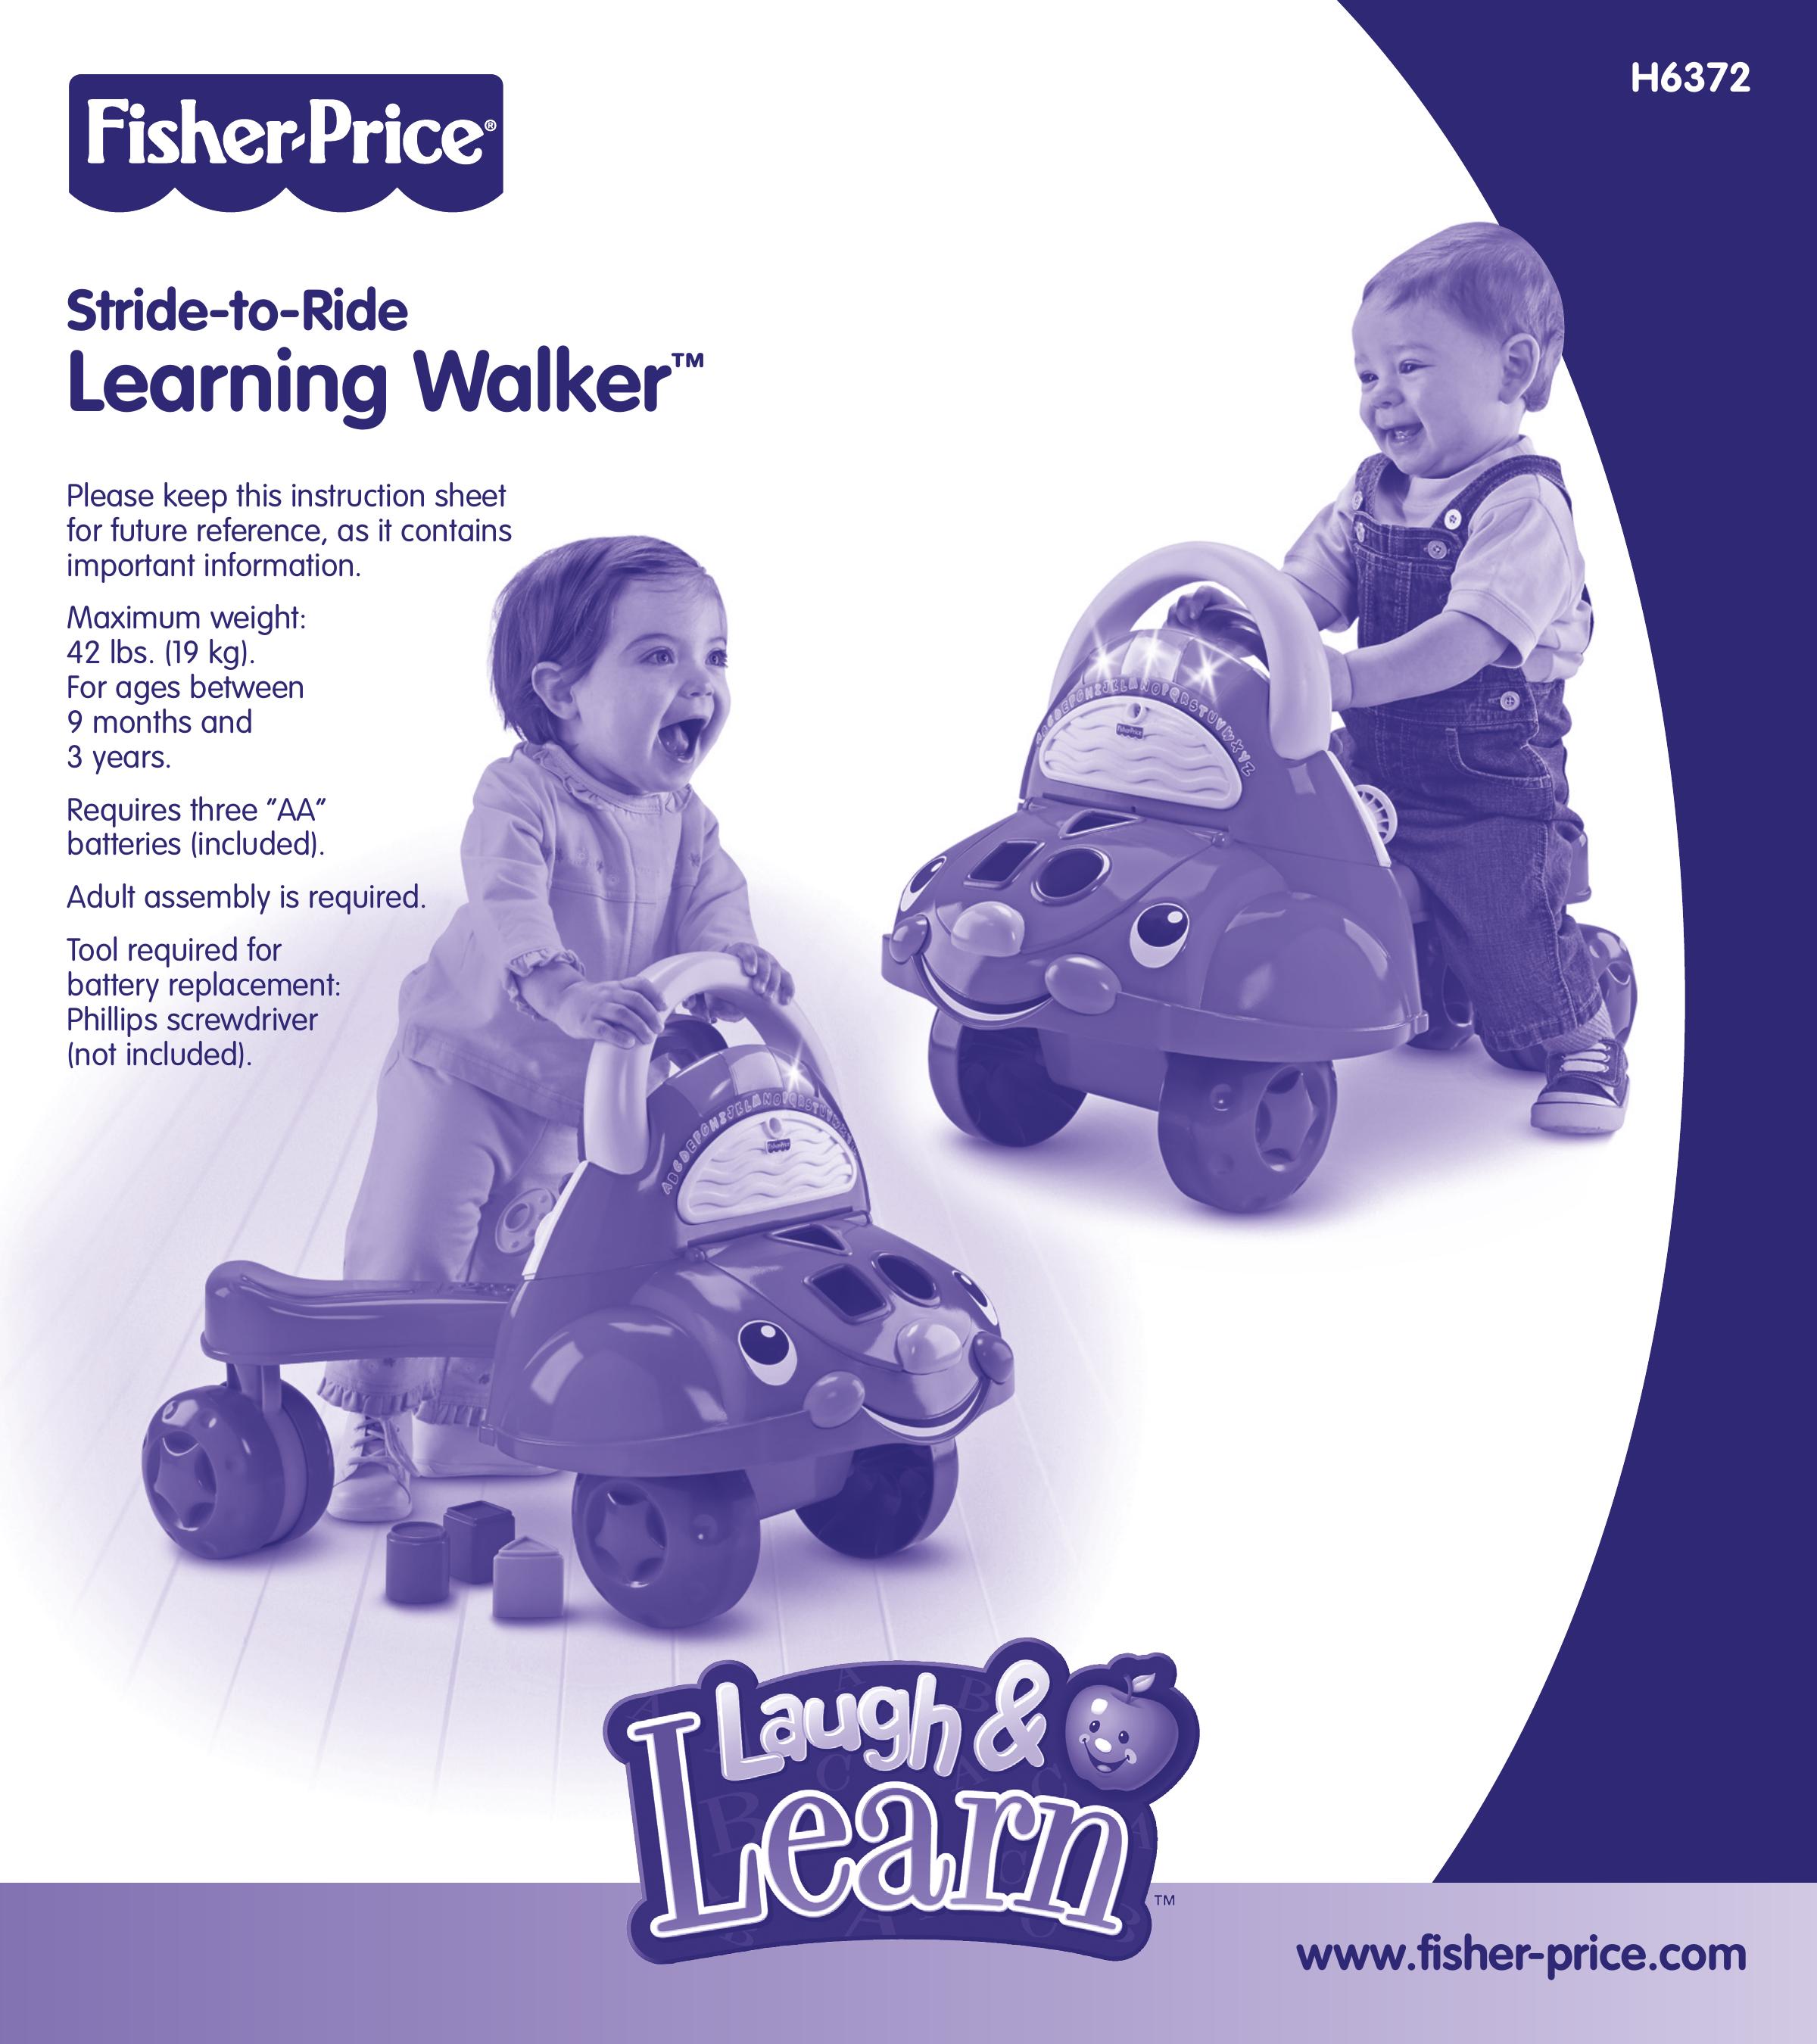 Fisher-Price H6372 Mobility Aid User Manual